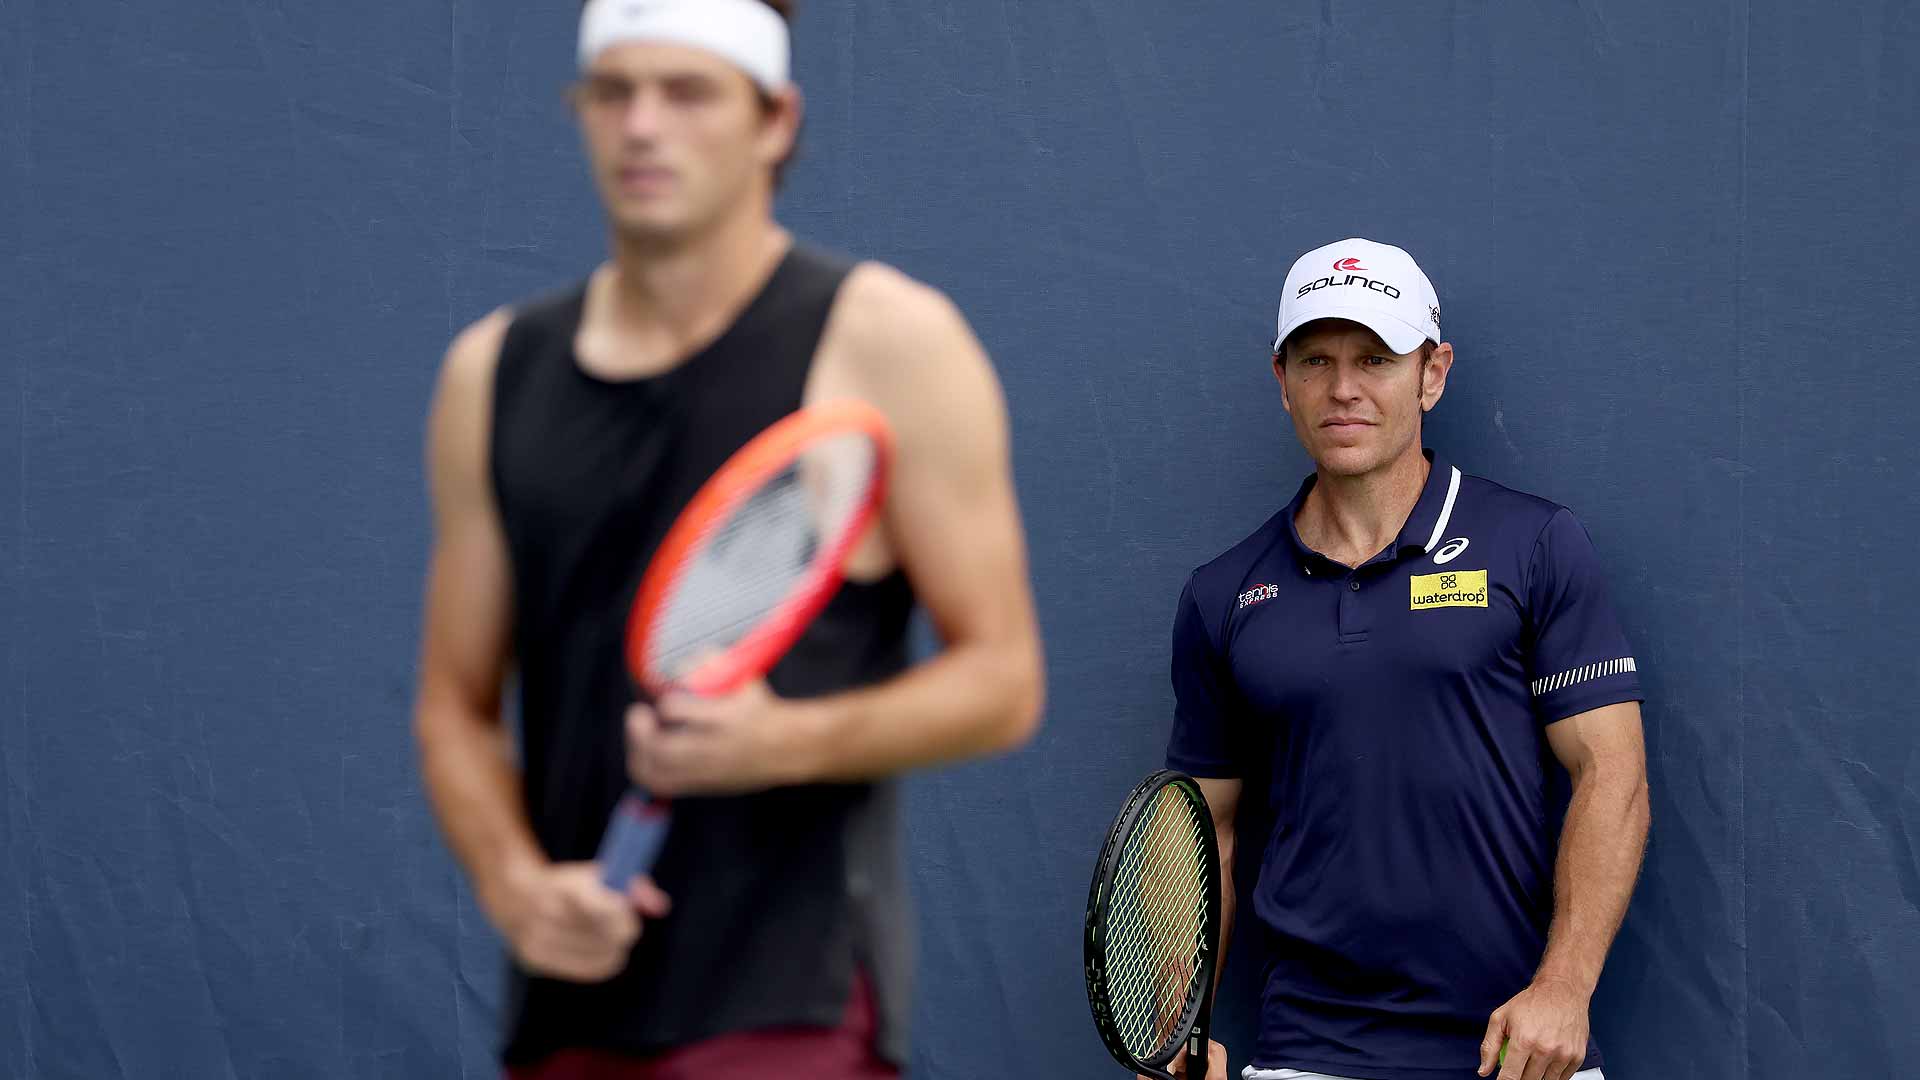 Michael Russell coaches Taylor Fritz at Flushing Meadows, where the American No. 1 is into the quarter-finals for the first time.